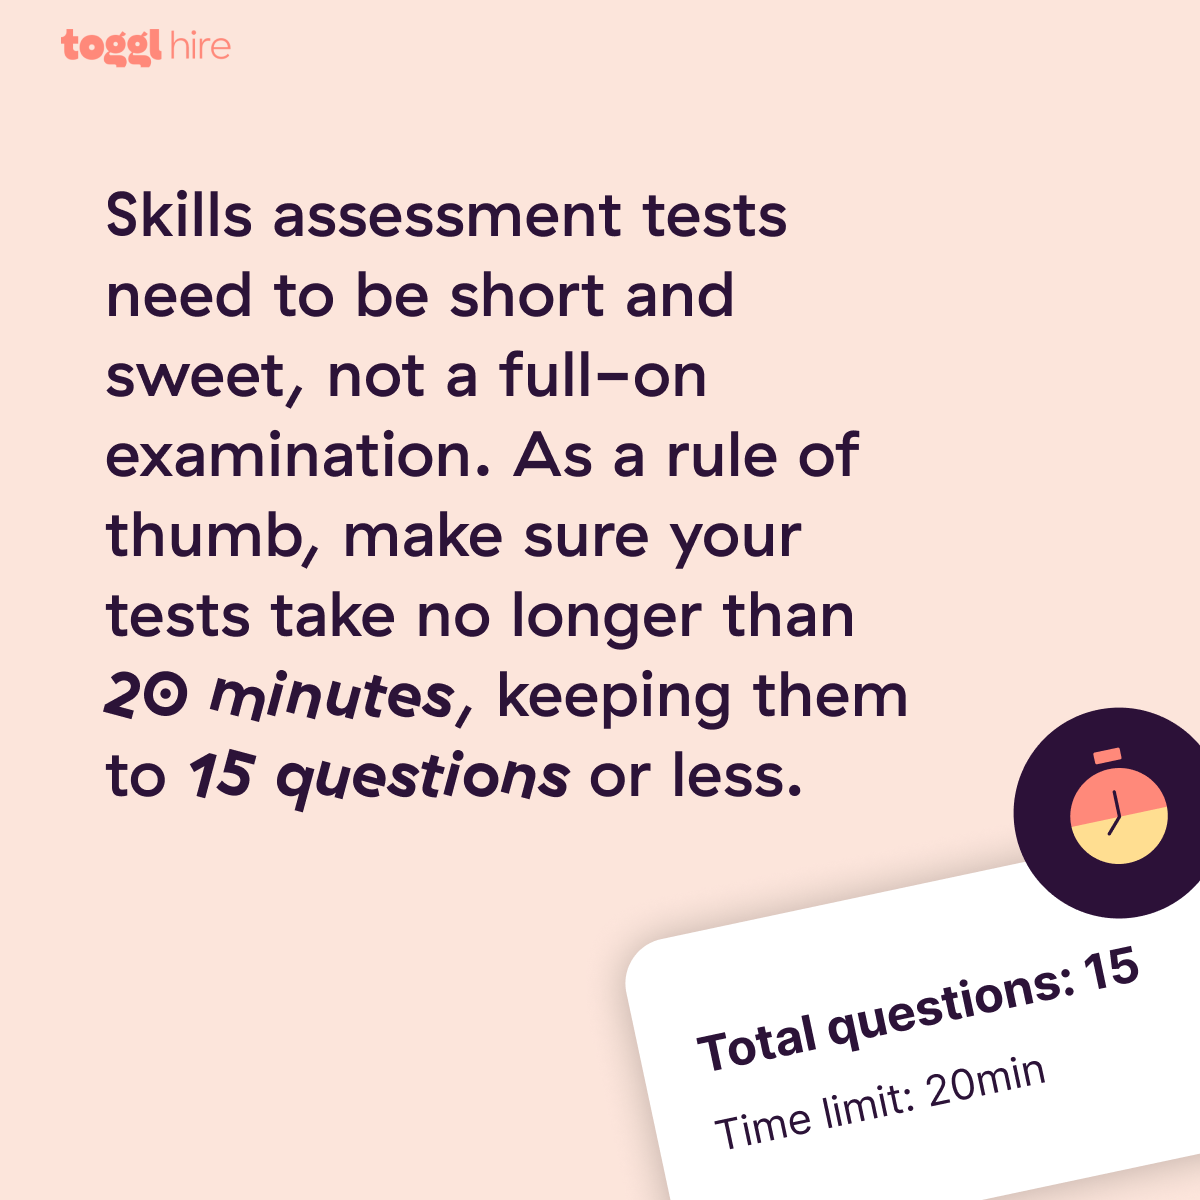 The best skills quiz is short and sweet. We recommend sticking to 20-minute assessments, 15 questions or less. 